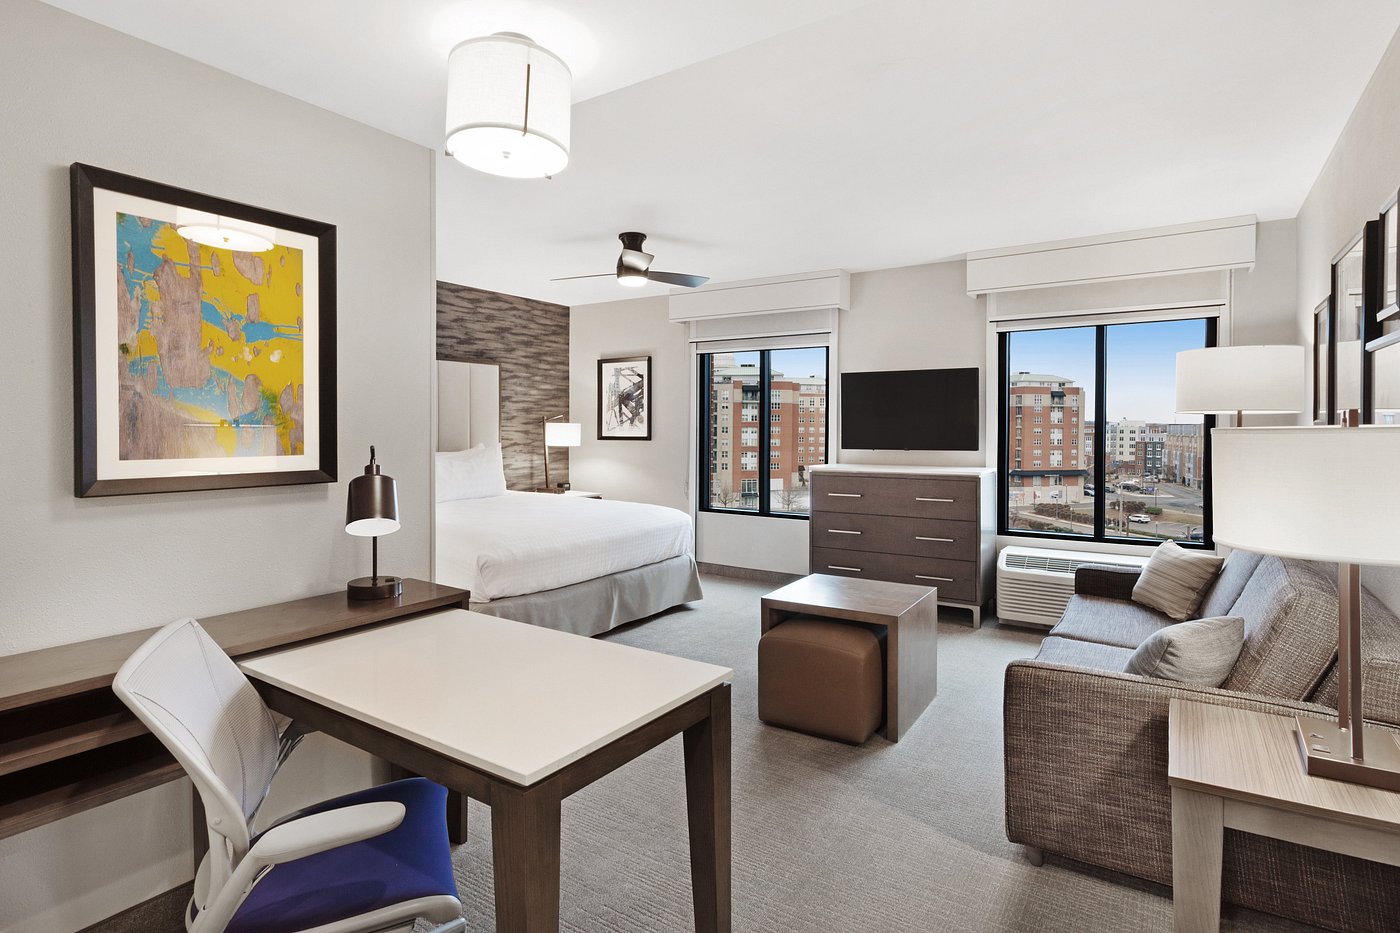 HOMEWOOD SUITES BY HILTON PROVIDENCE DOWNTOWN: UPDATED 2023 Hotel